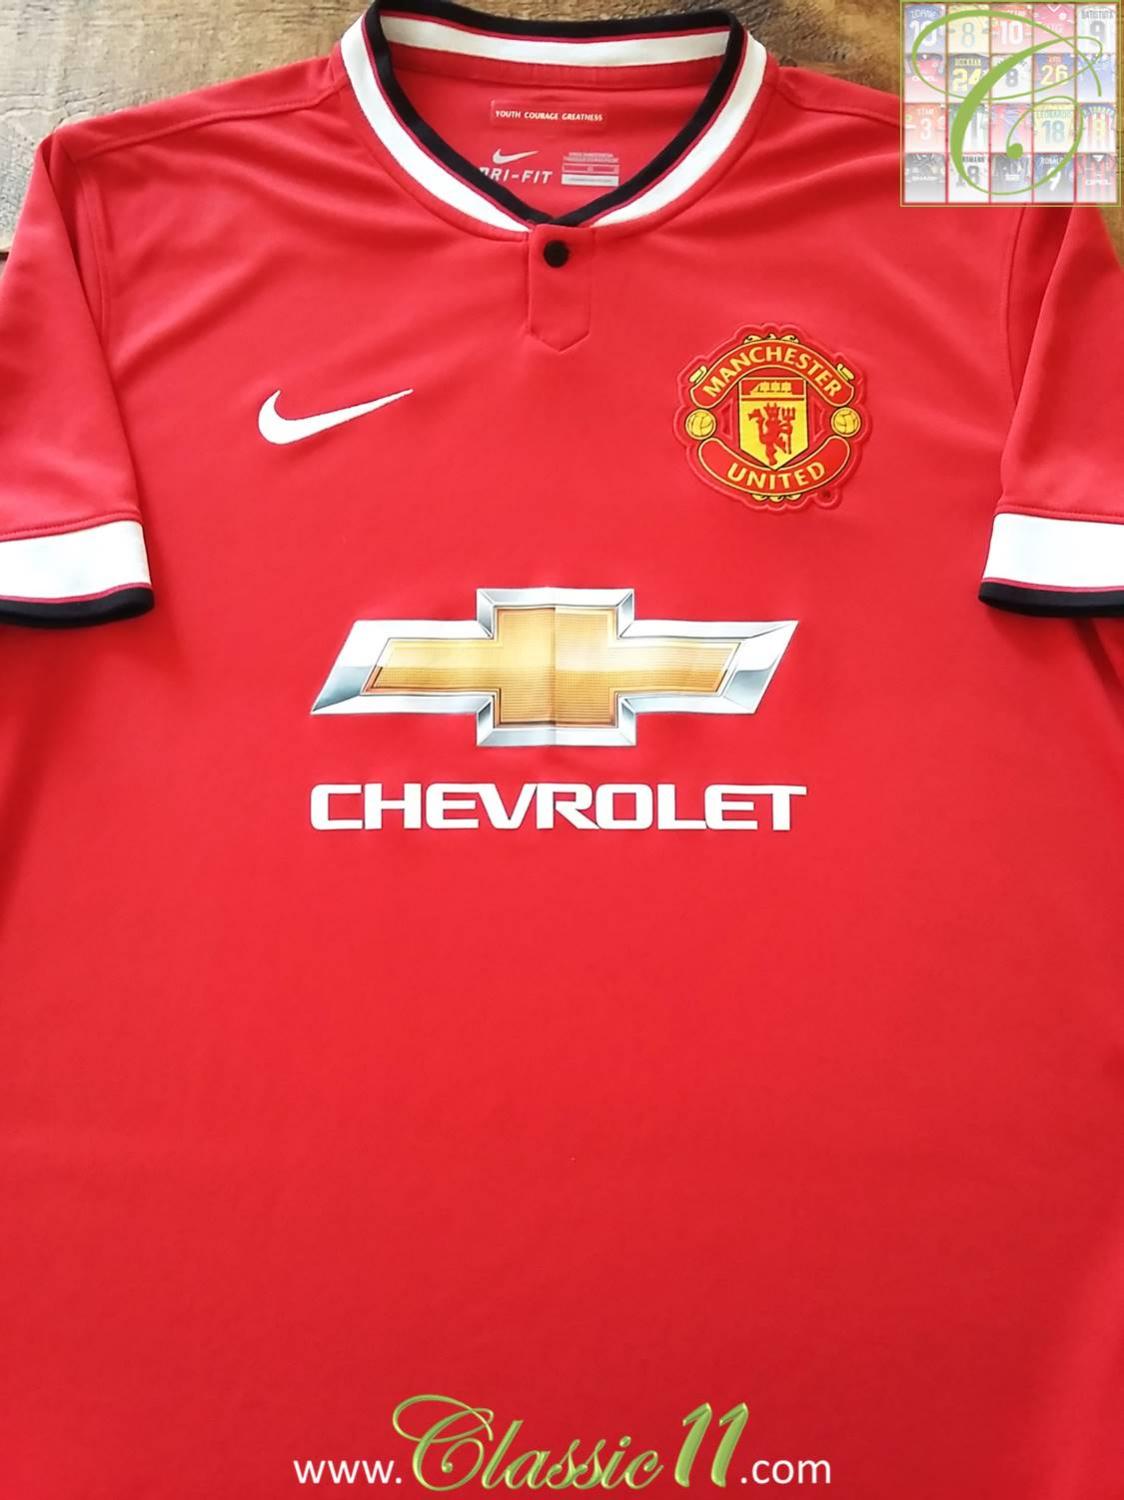 Manchester United Home football shirt 2014 - 2015. Sponsored by Chevrolet